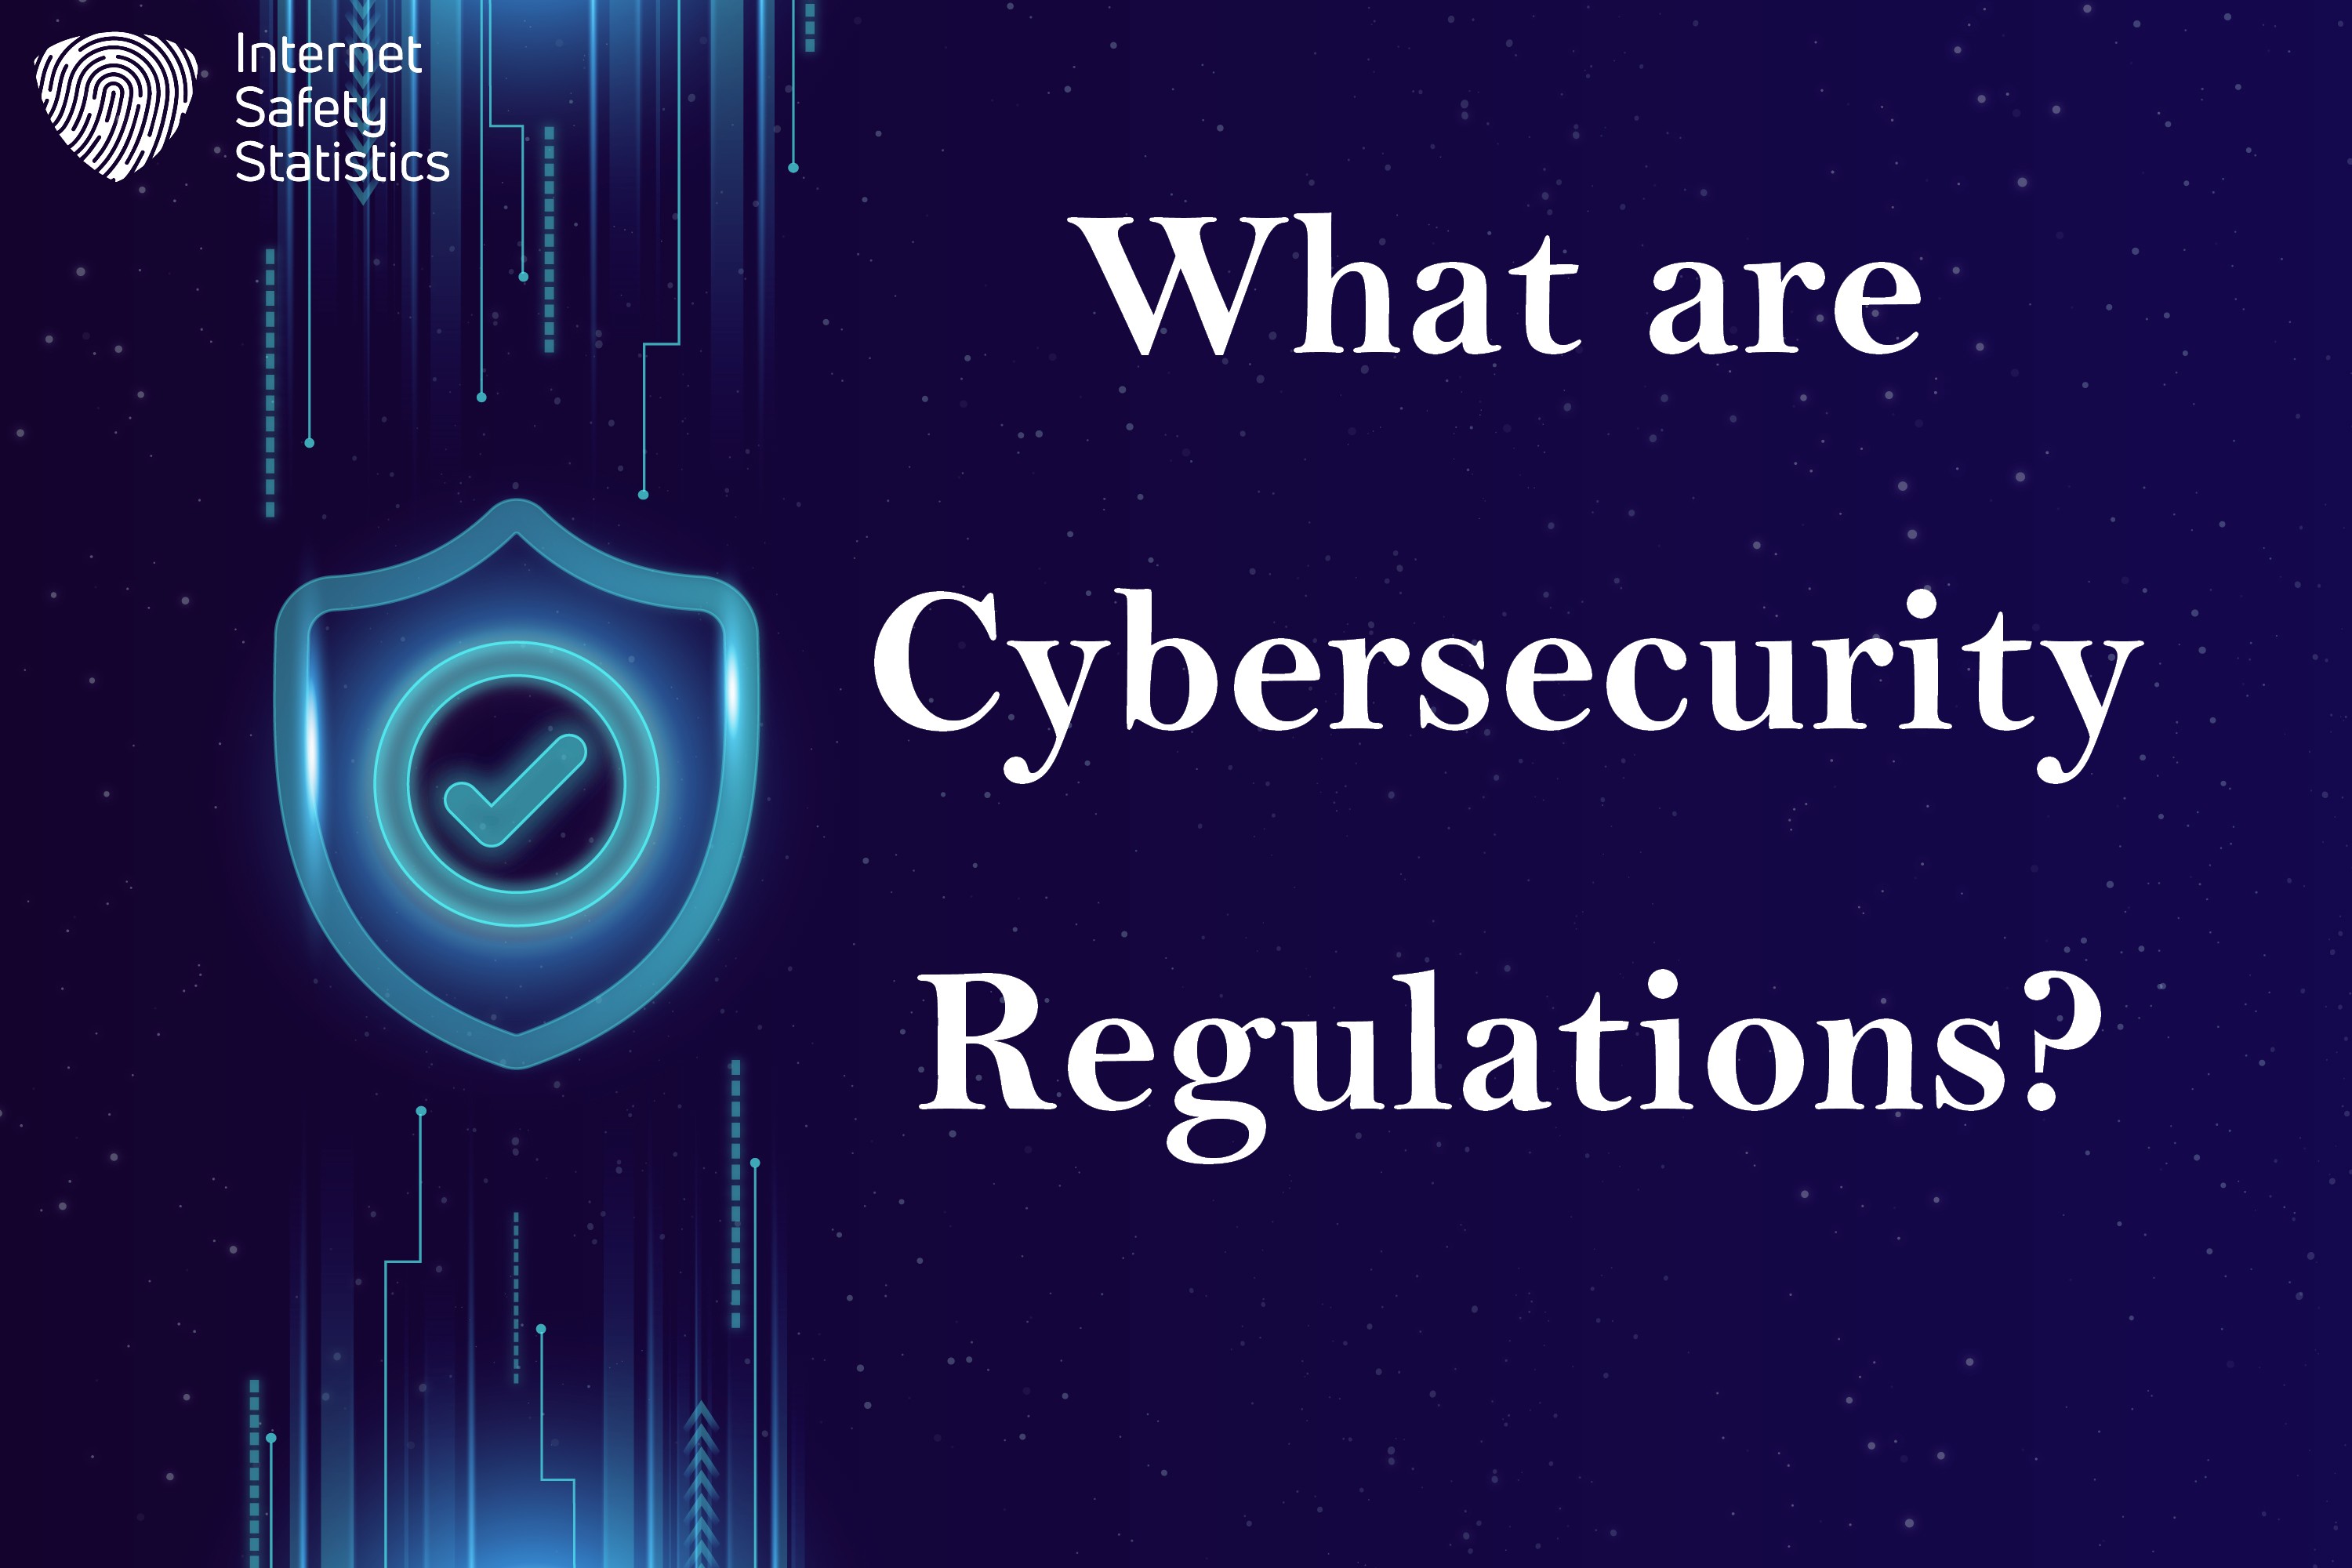 What are Cybersecurity Regulations?